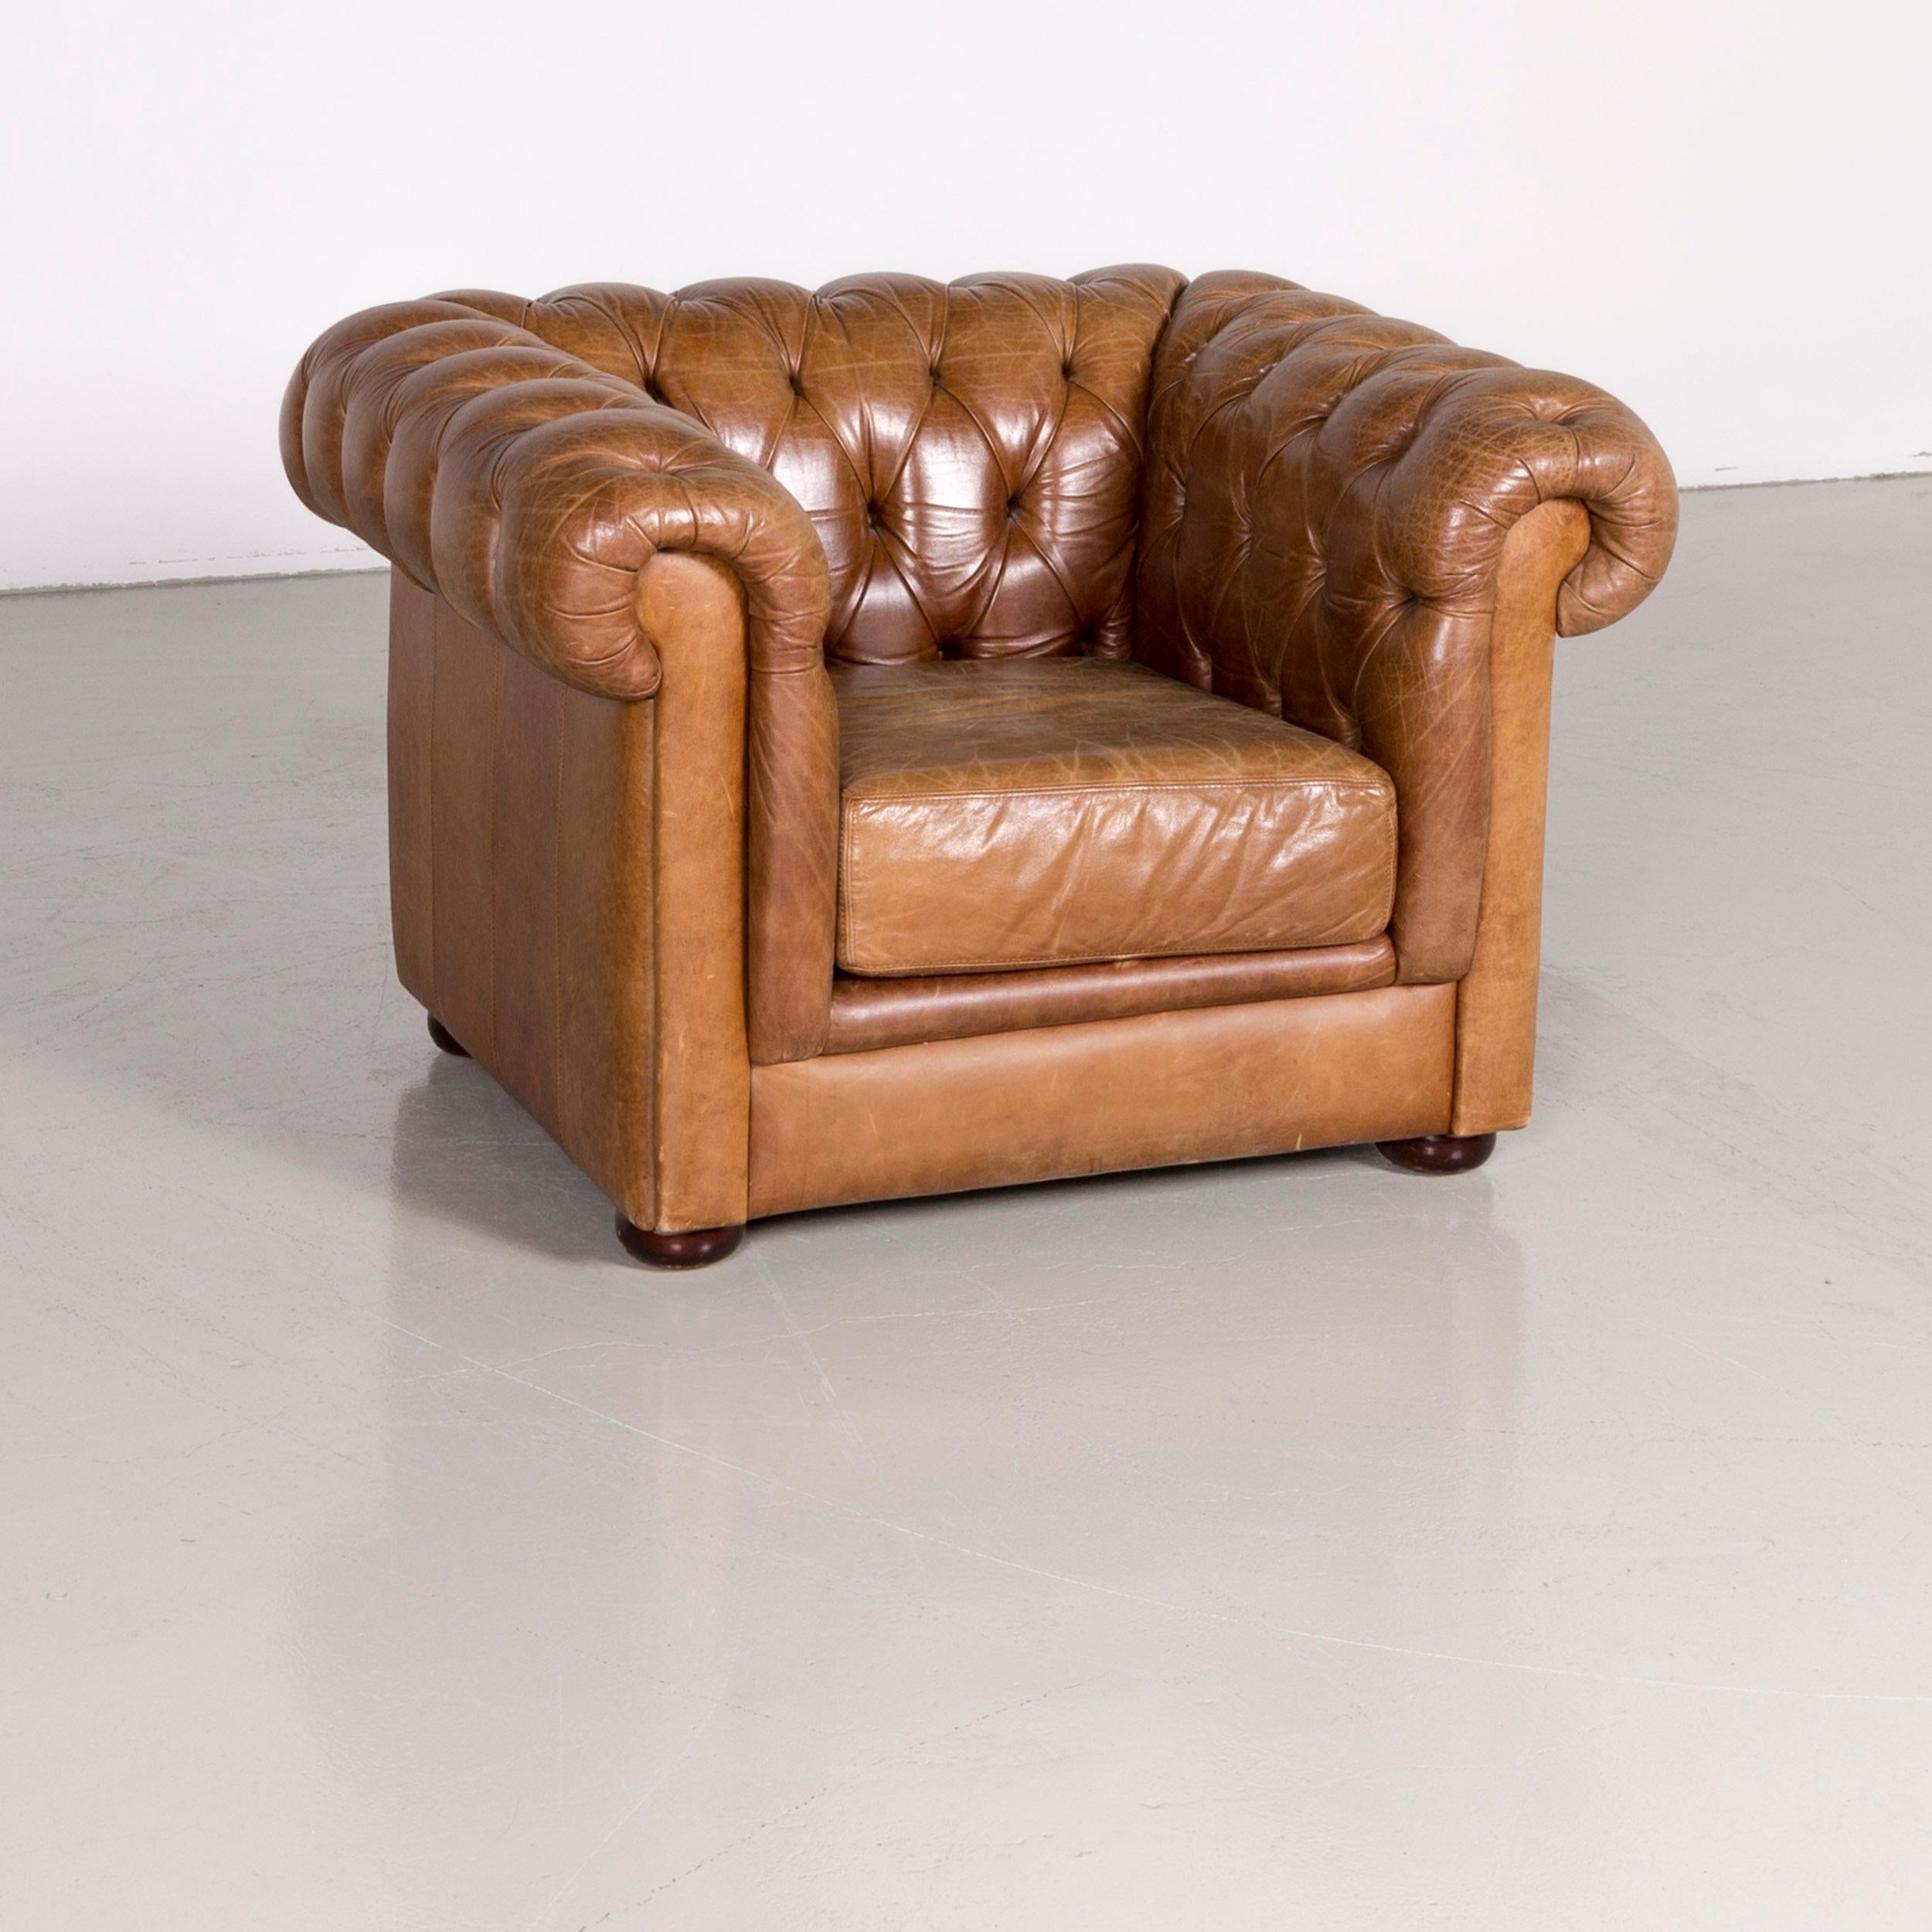 We bring to you a Chesterfield leather armchair brown red vintage.